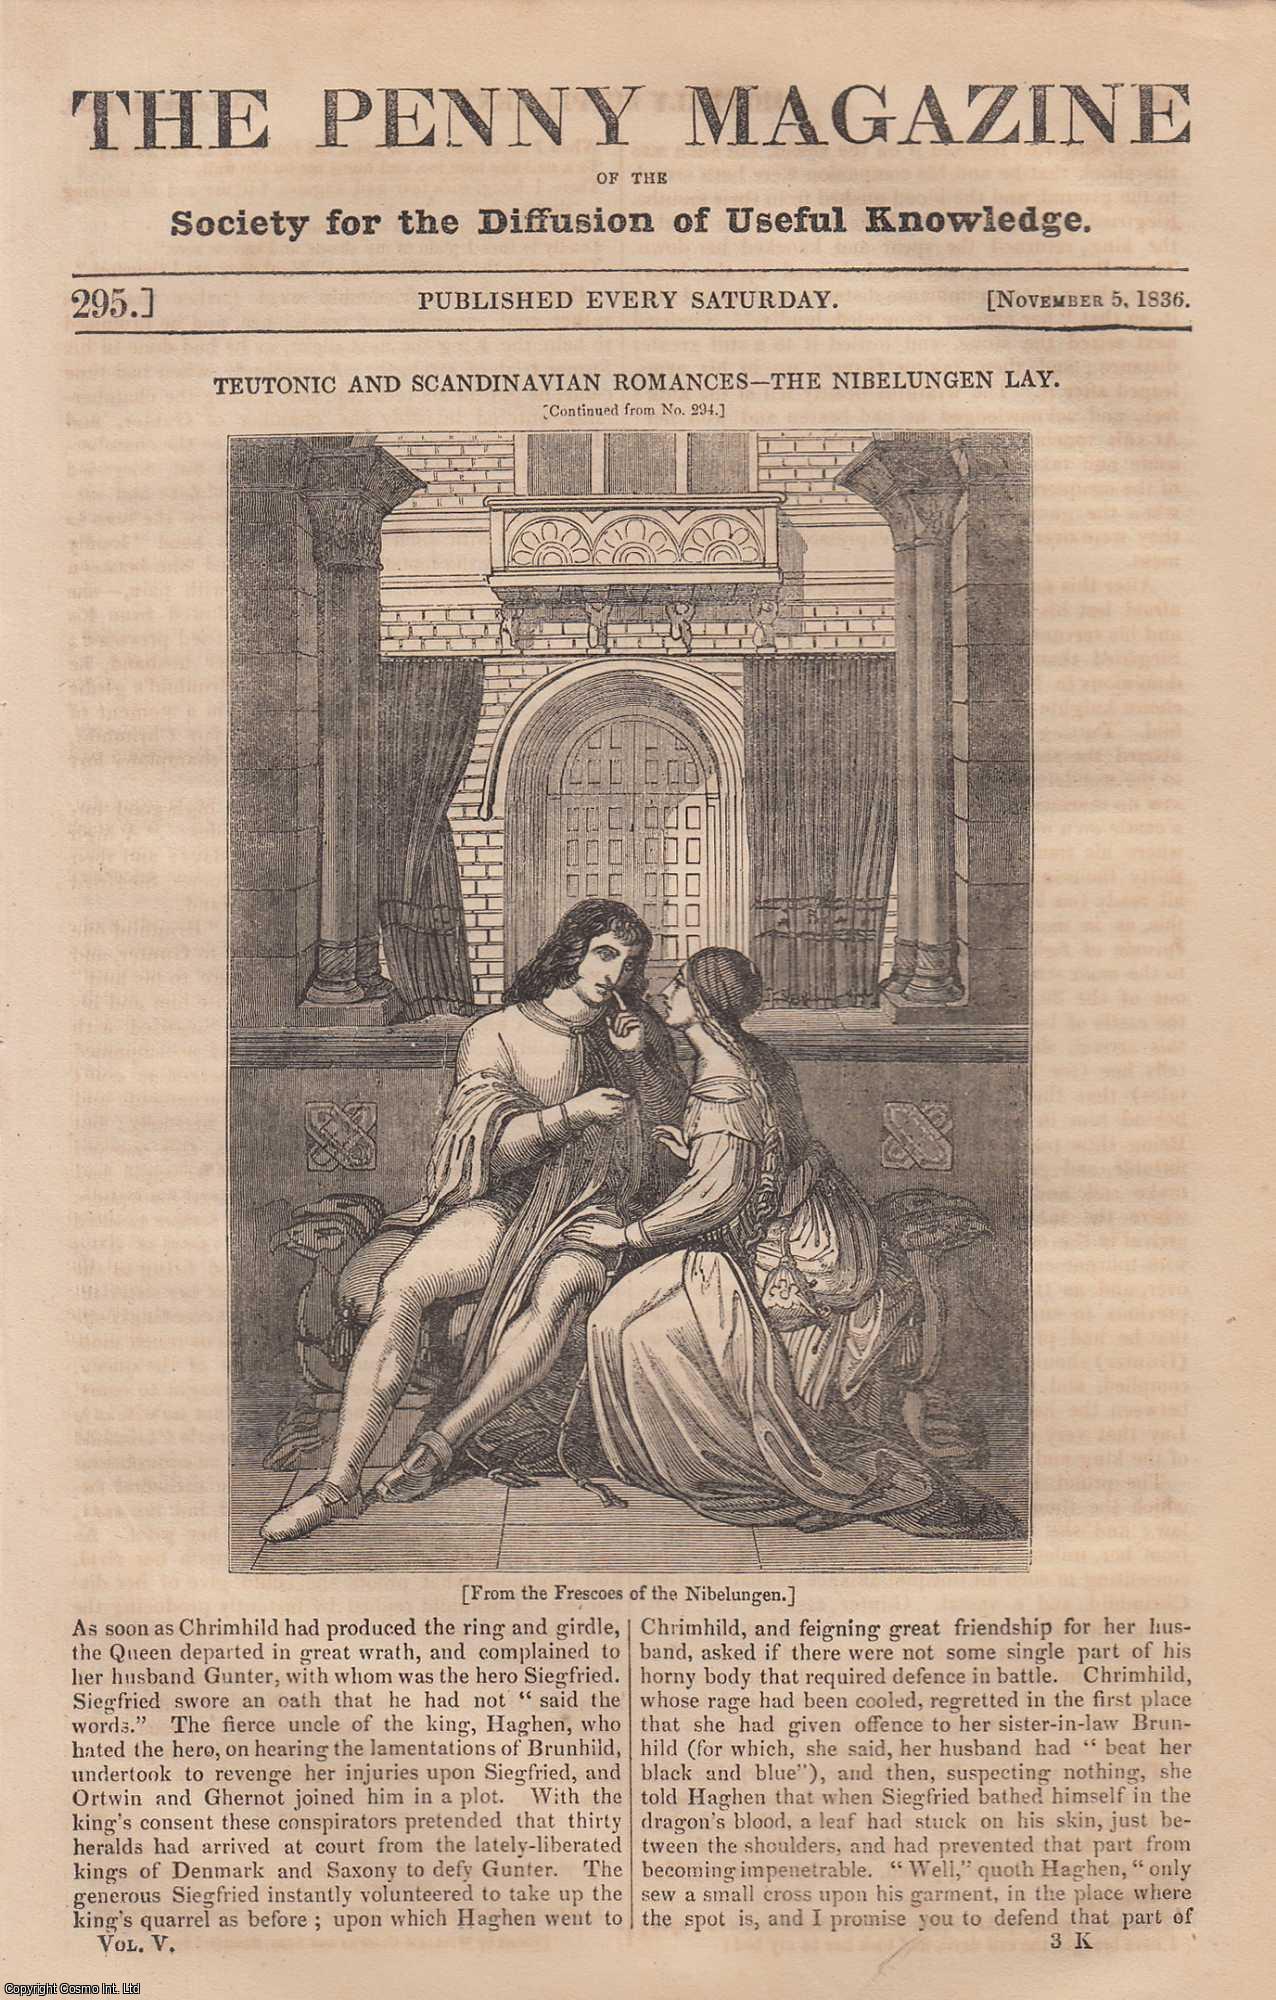 Penny Magazine - Teutonic and Scandinavian Romances (part 2): The Nibelungen Lay; Agriculture Gardening of China (part 2); Pesth (largest town in Hungary), etc. Issue No. 295, 1836. A complete original weekly issue of the Penny Magazine, 1836.